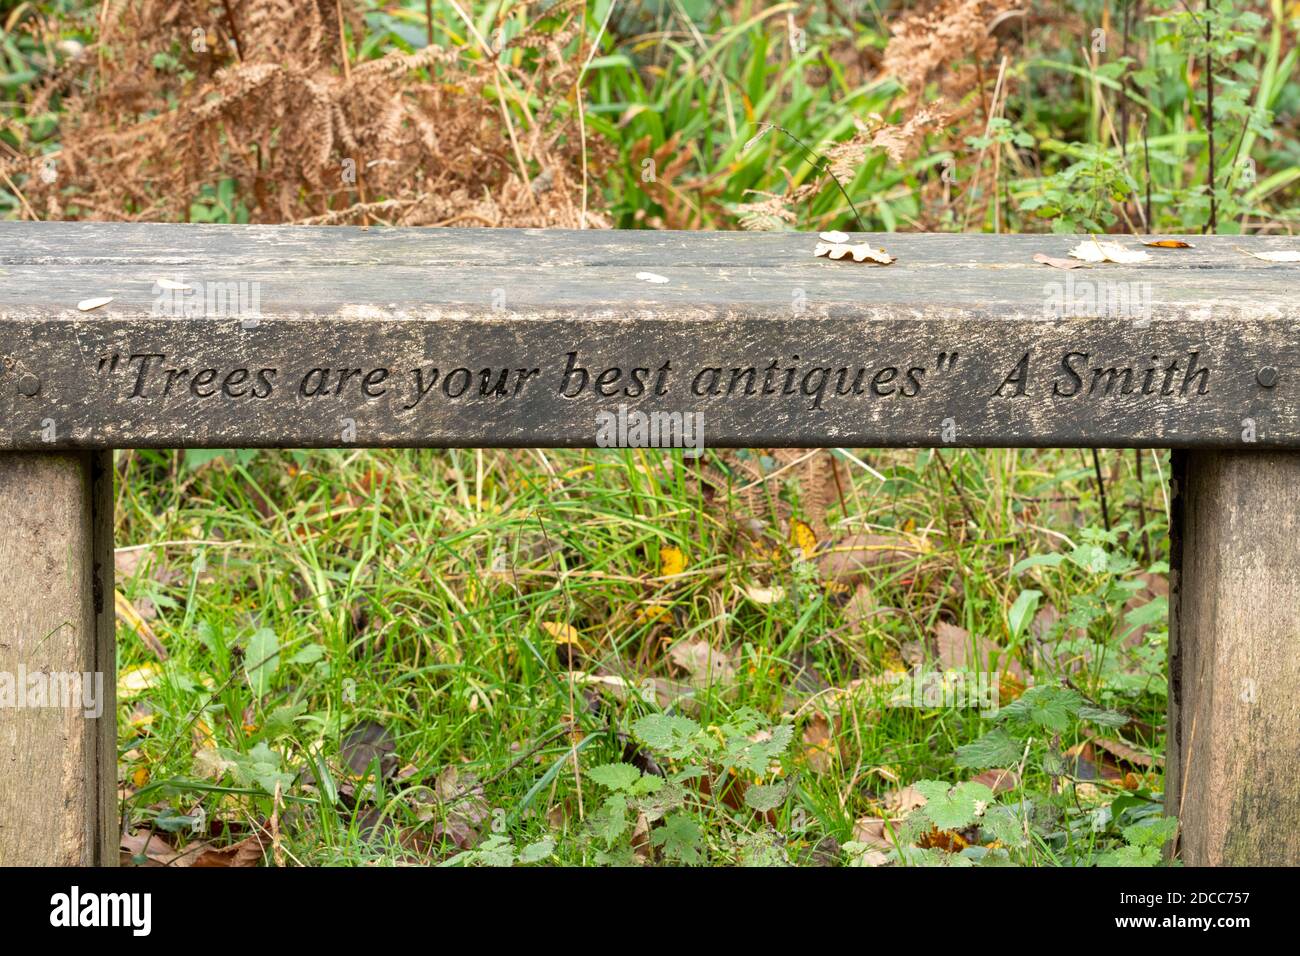 Quote by Alexander Smith on a wooden bench 'Trees are your best antiques' Stock Photo